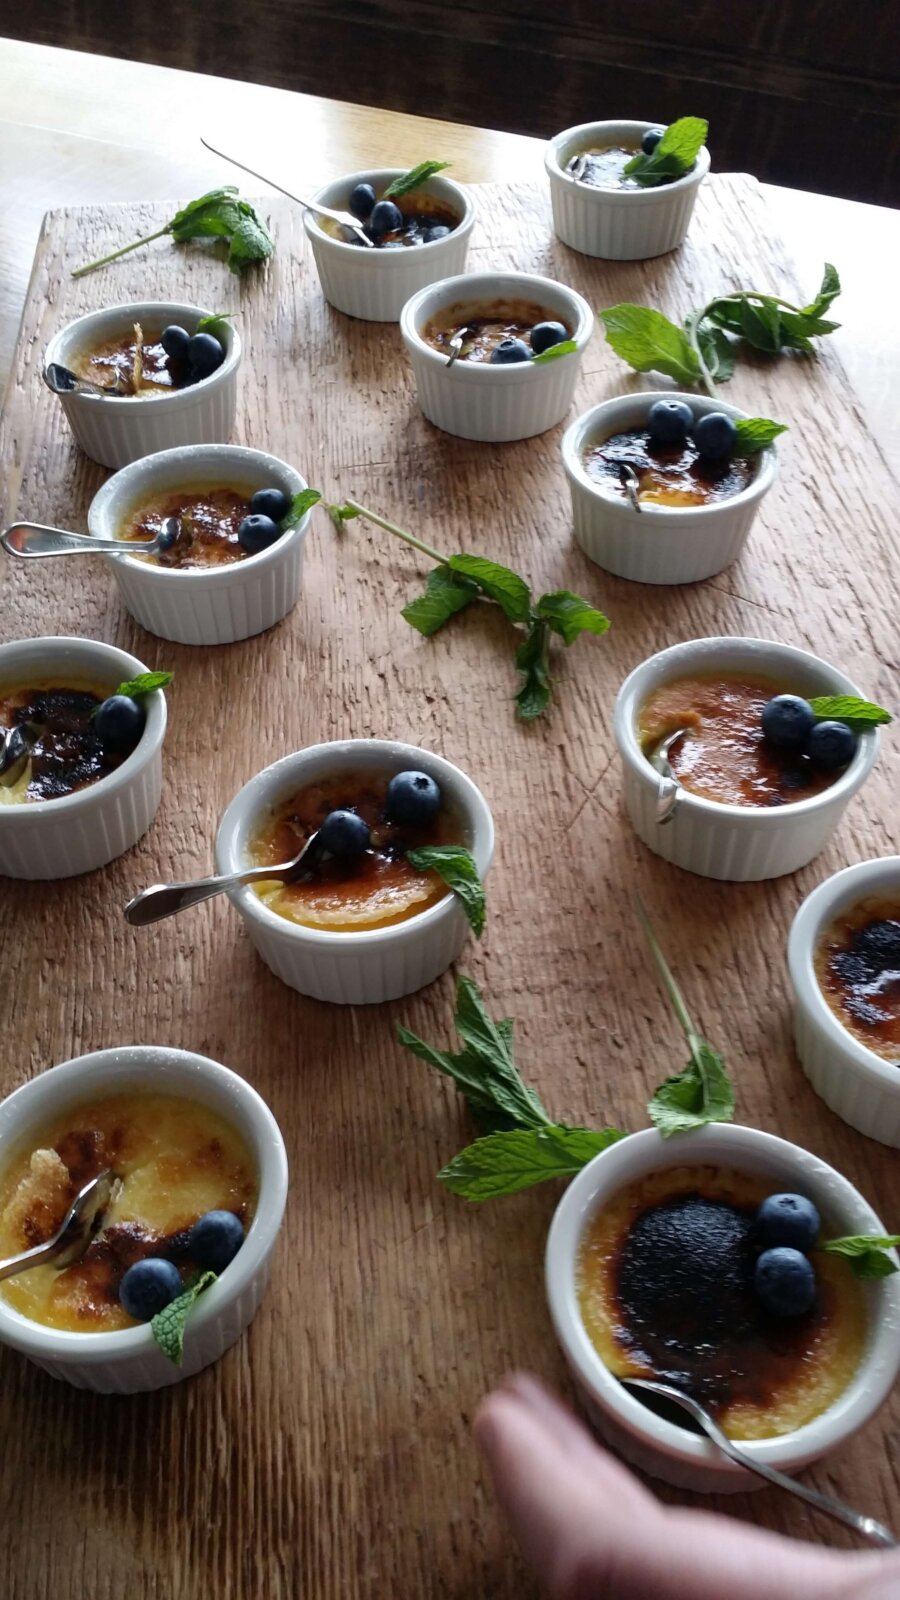 Creme Brulee cups on the table